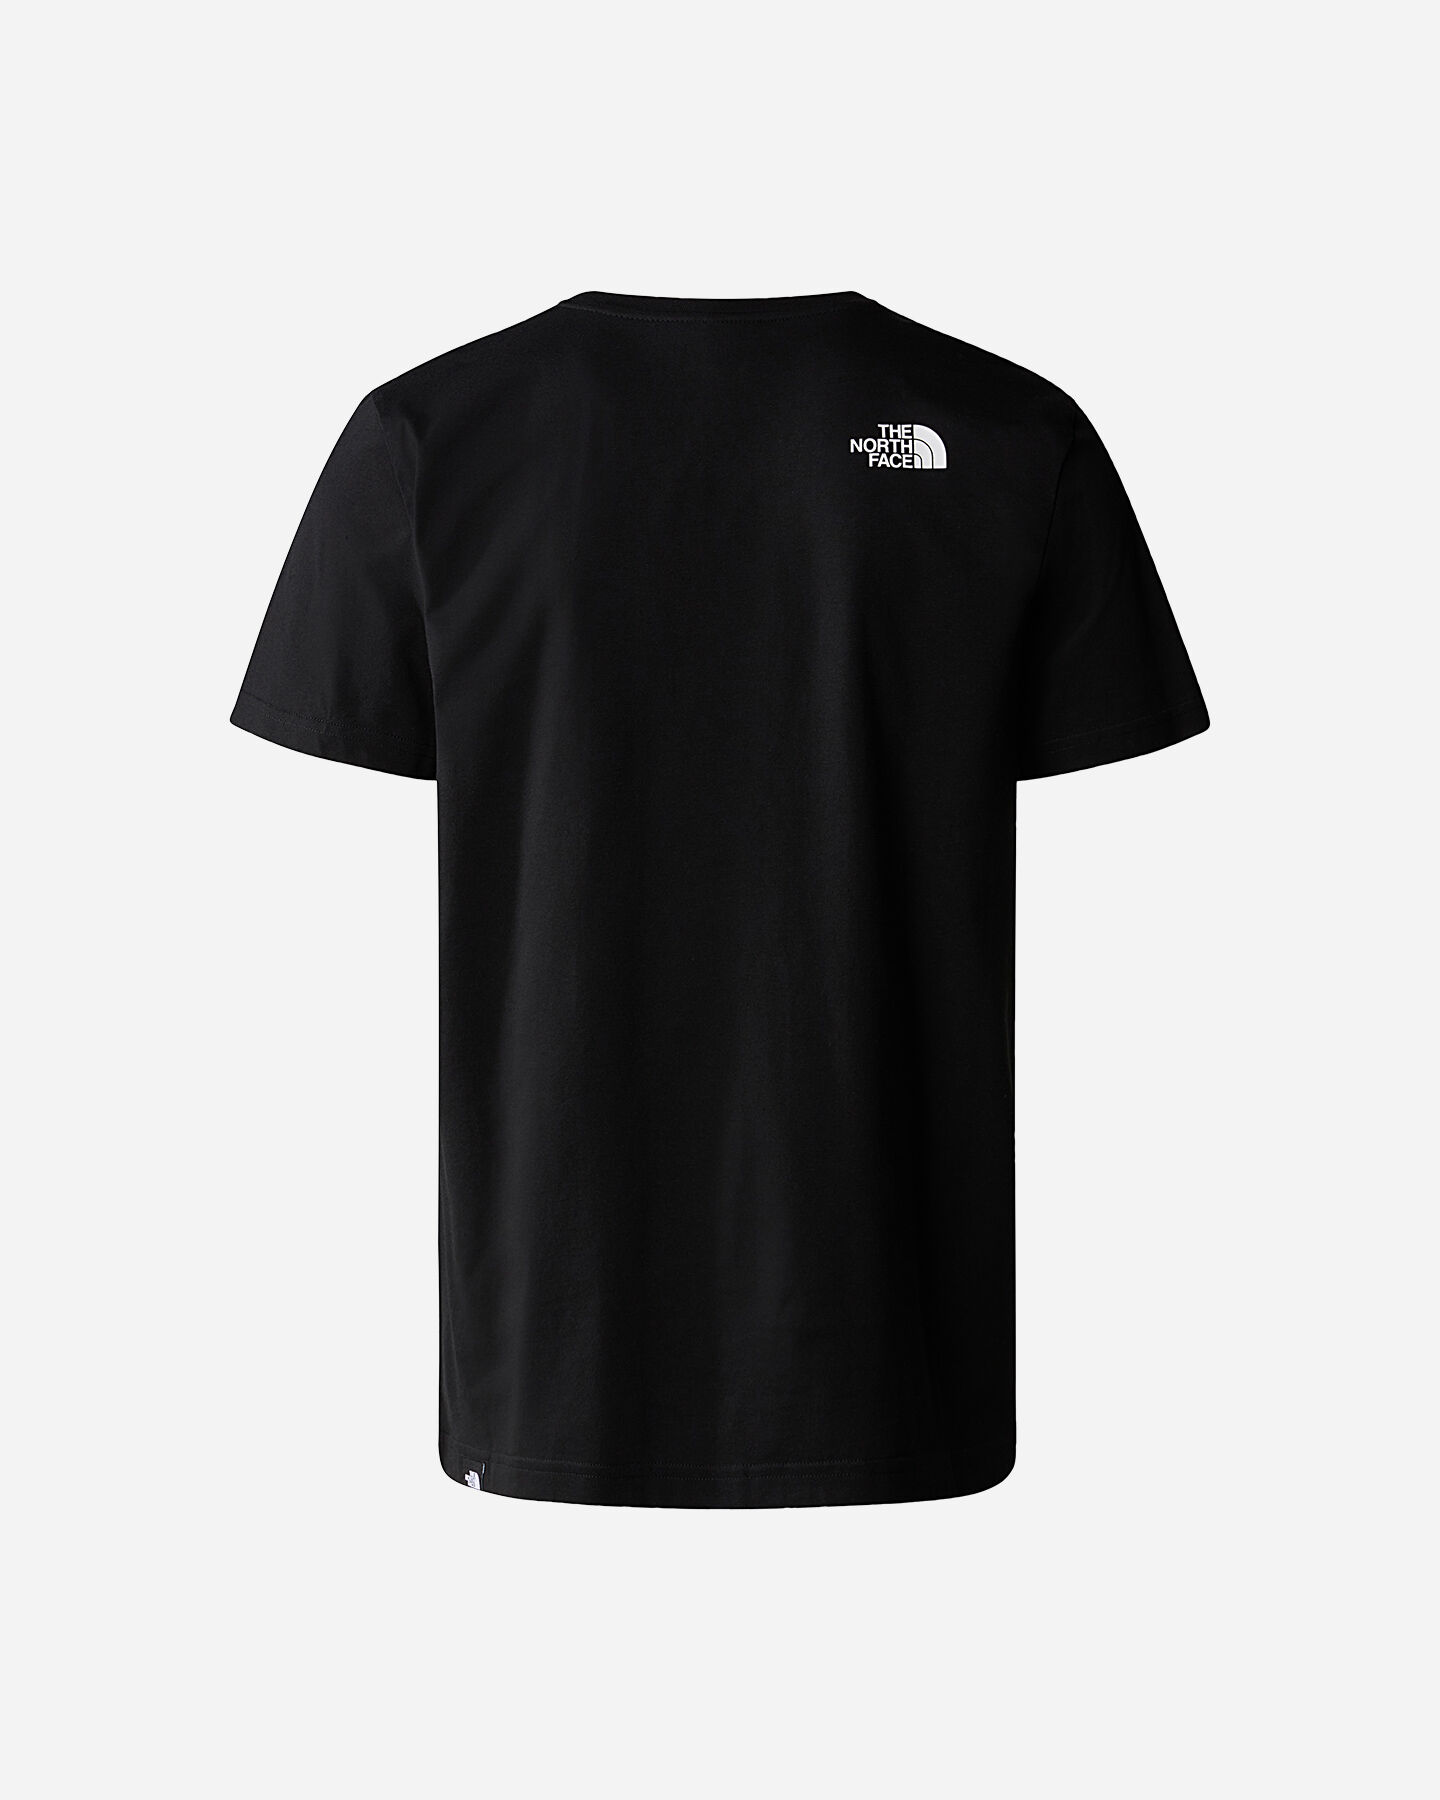  T-Shirt THE NORTH FACE SIMPLE DOME M S5651049|JK3|S scatto 1